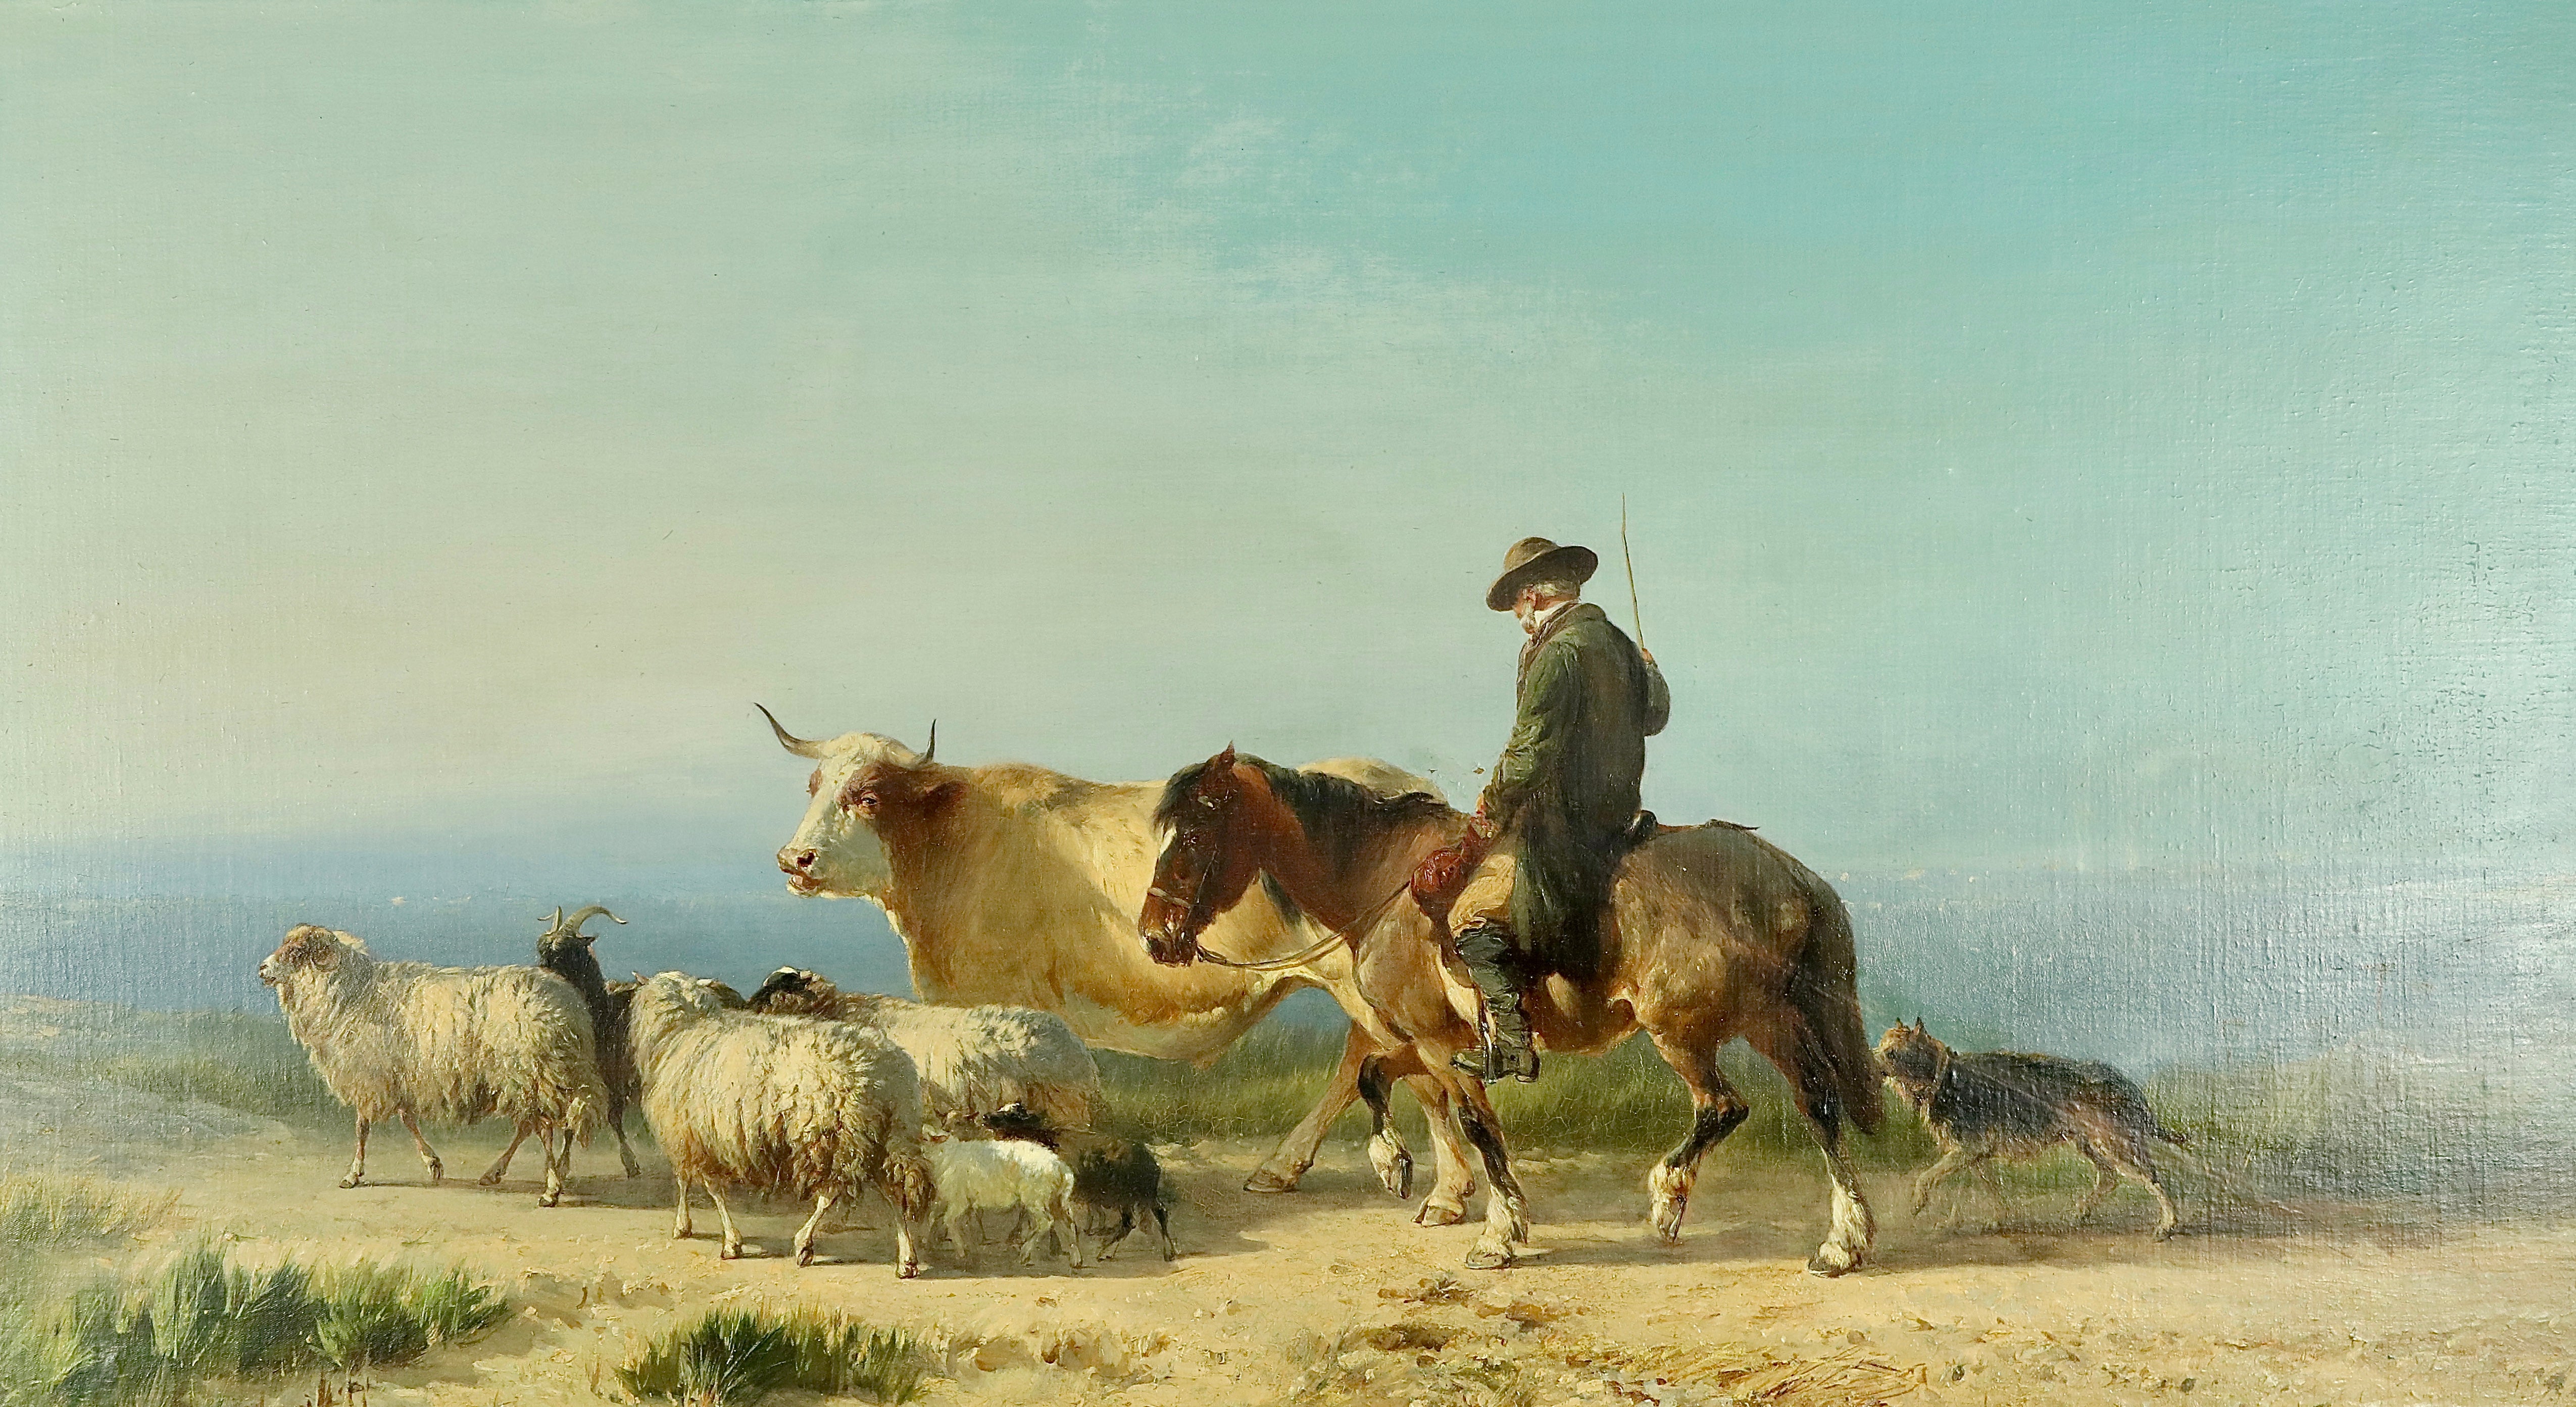 SHEPERD ON HORSE WITH DOG AND SHEEP - PAINTED BY ALFRED EDOUARD AGENOR VAN BYLANDT (1875)